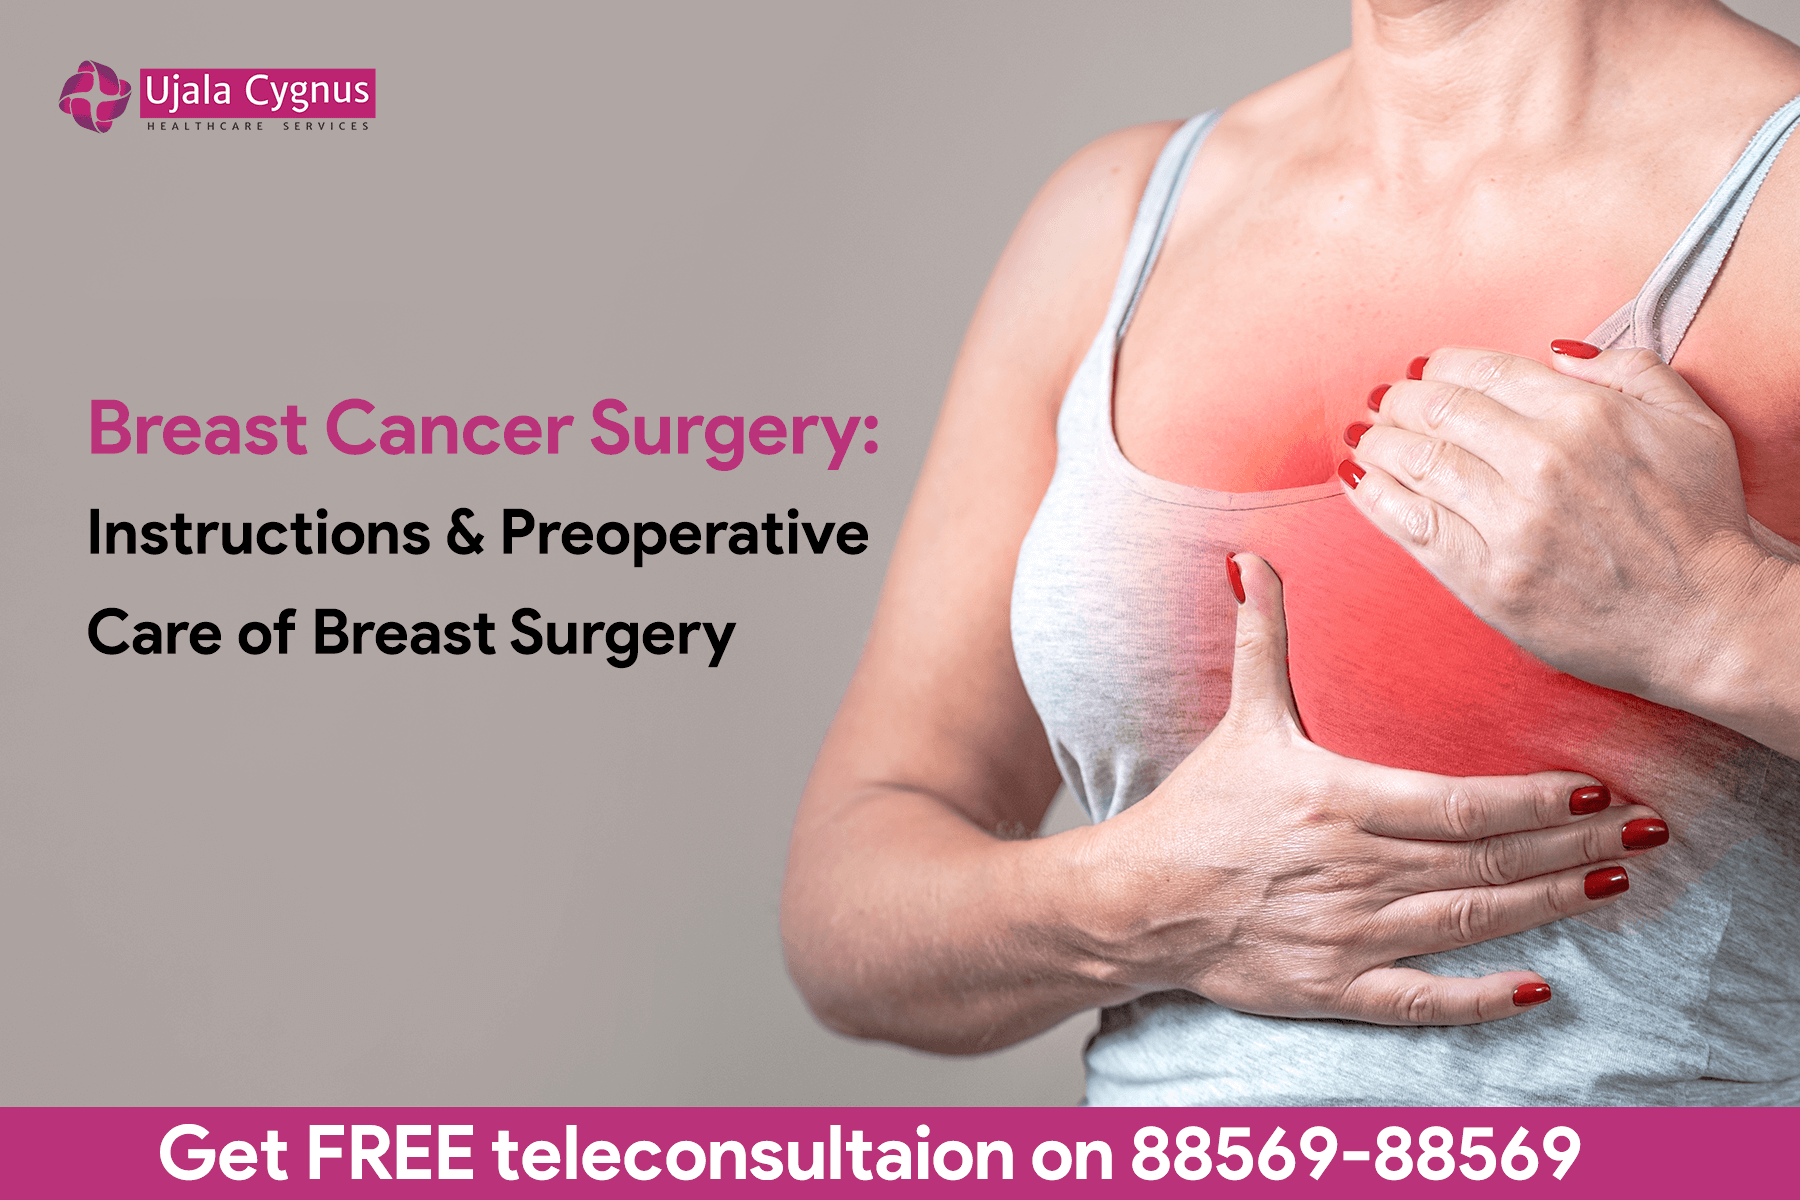 Preoperative Instructions and Care for Breast Cancer Surgery